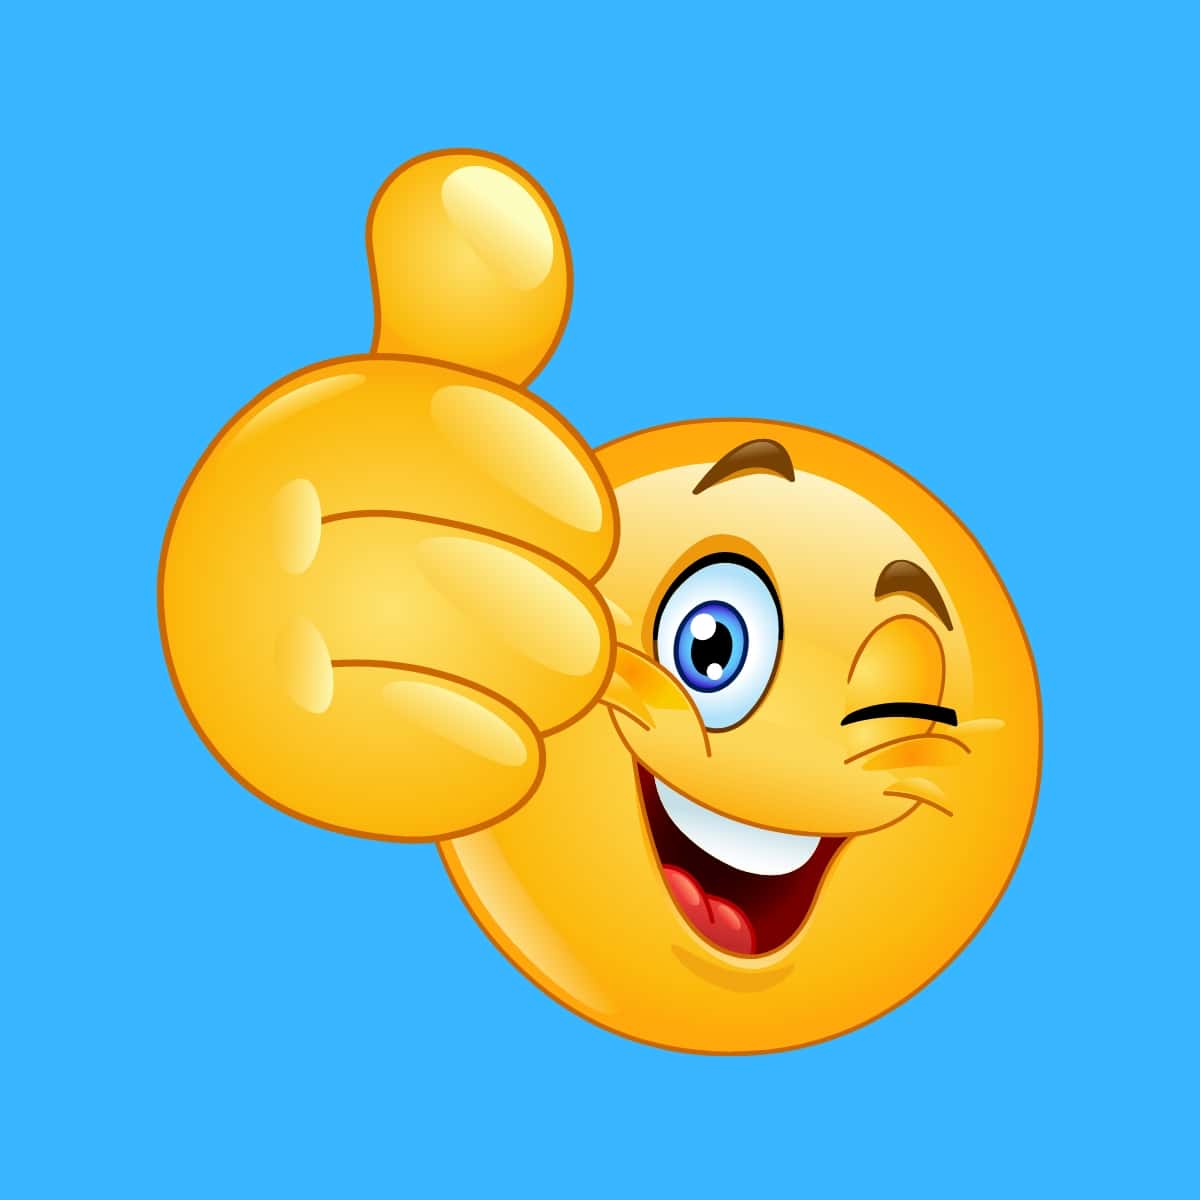 Cartoon graphic of a smiling emoji giving the thumbs up at a funny joke on a blue background.